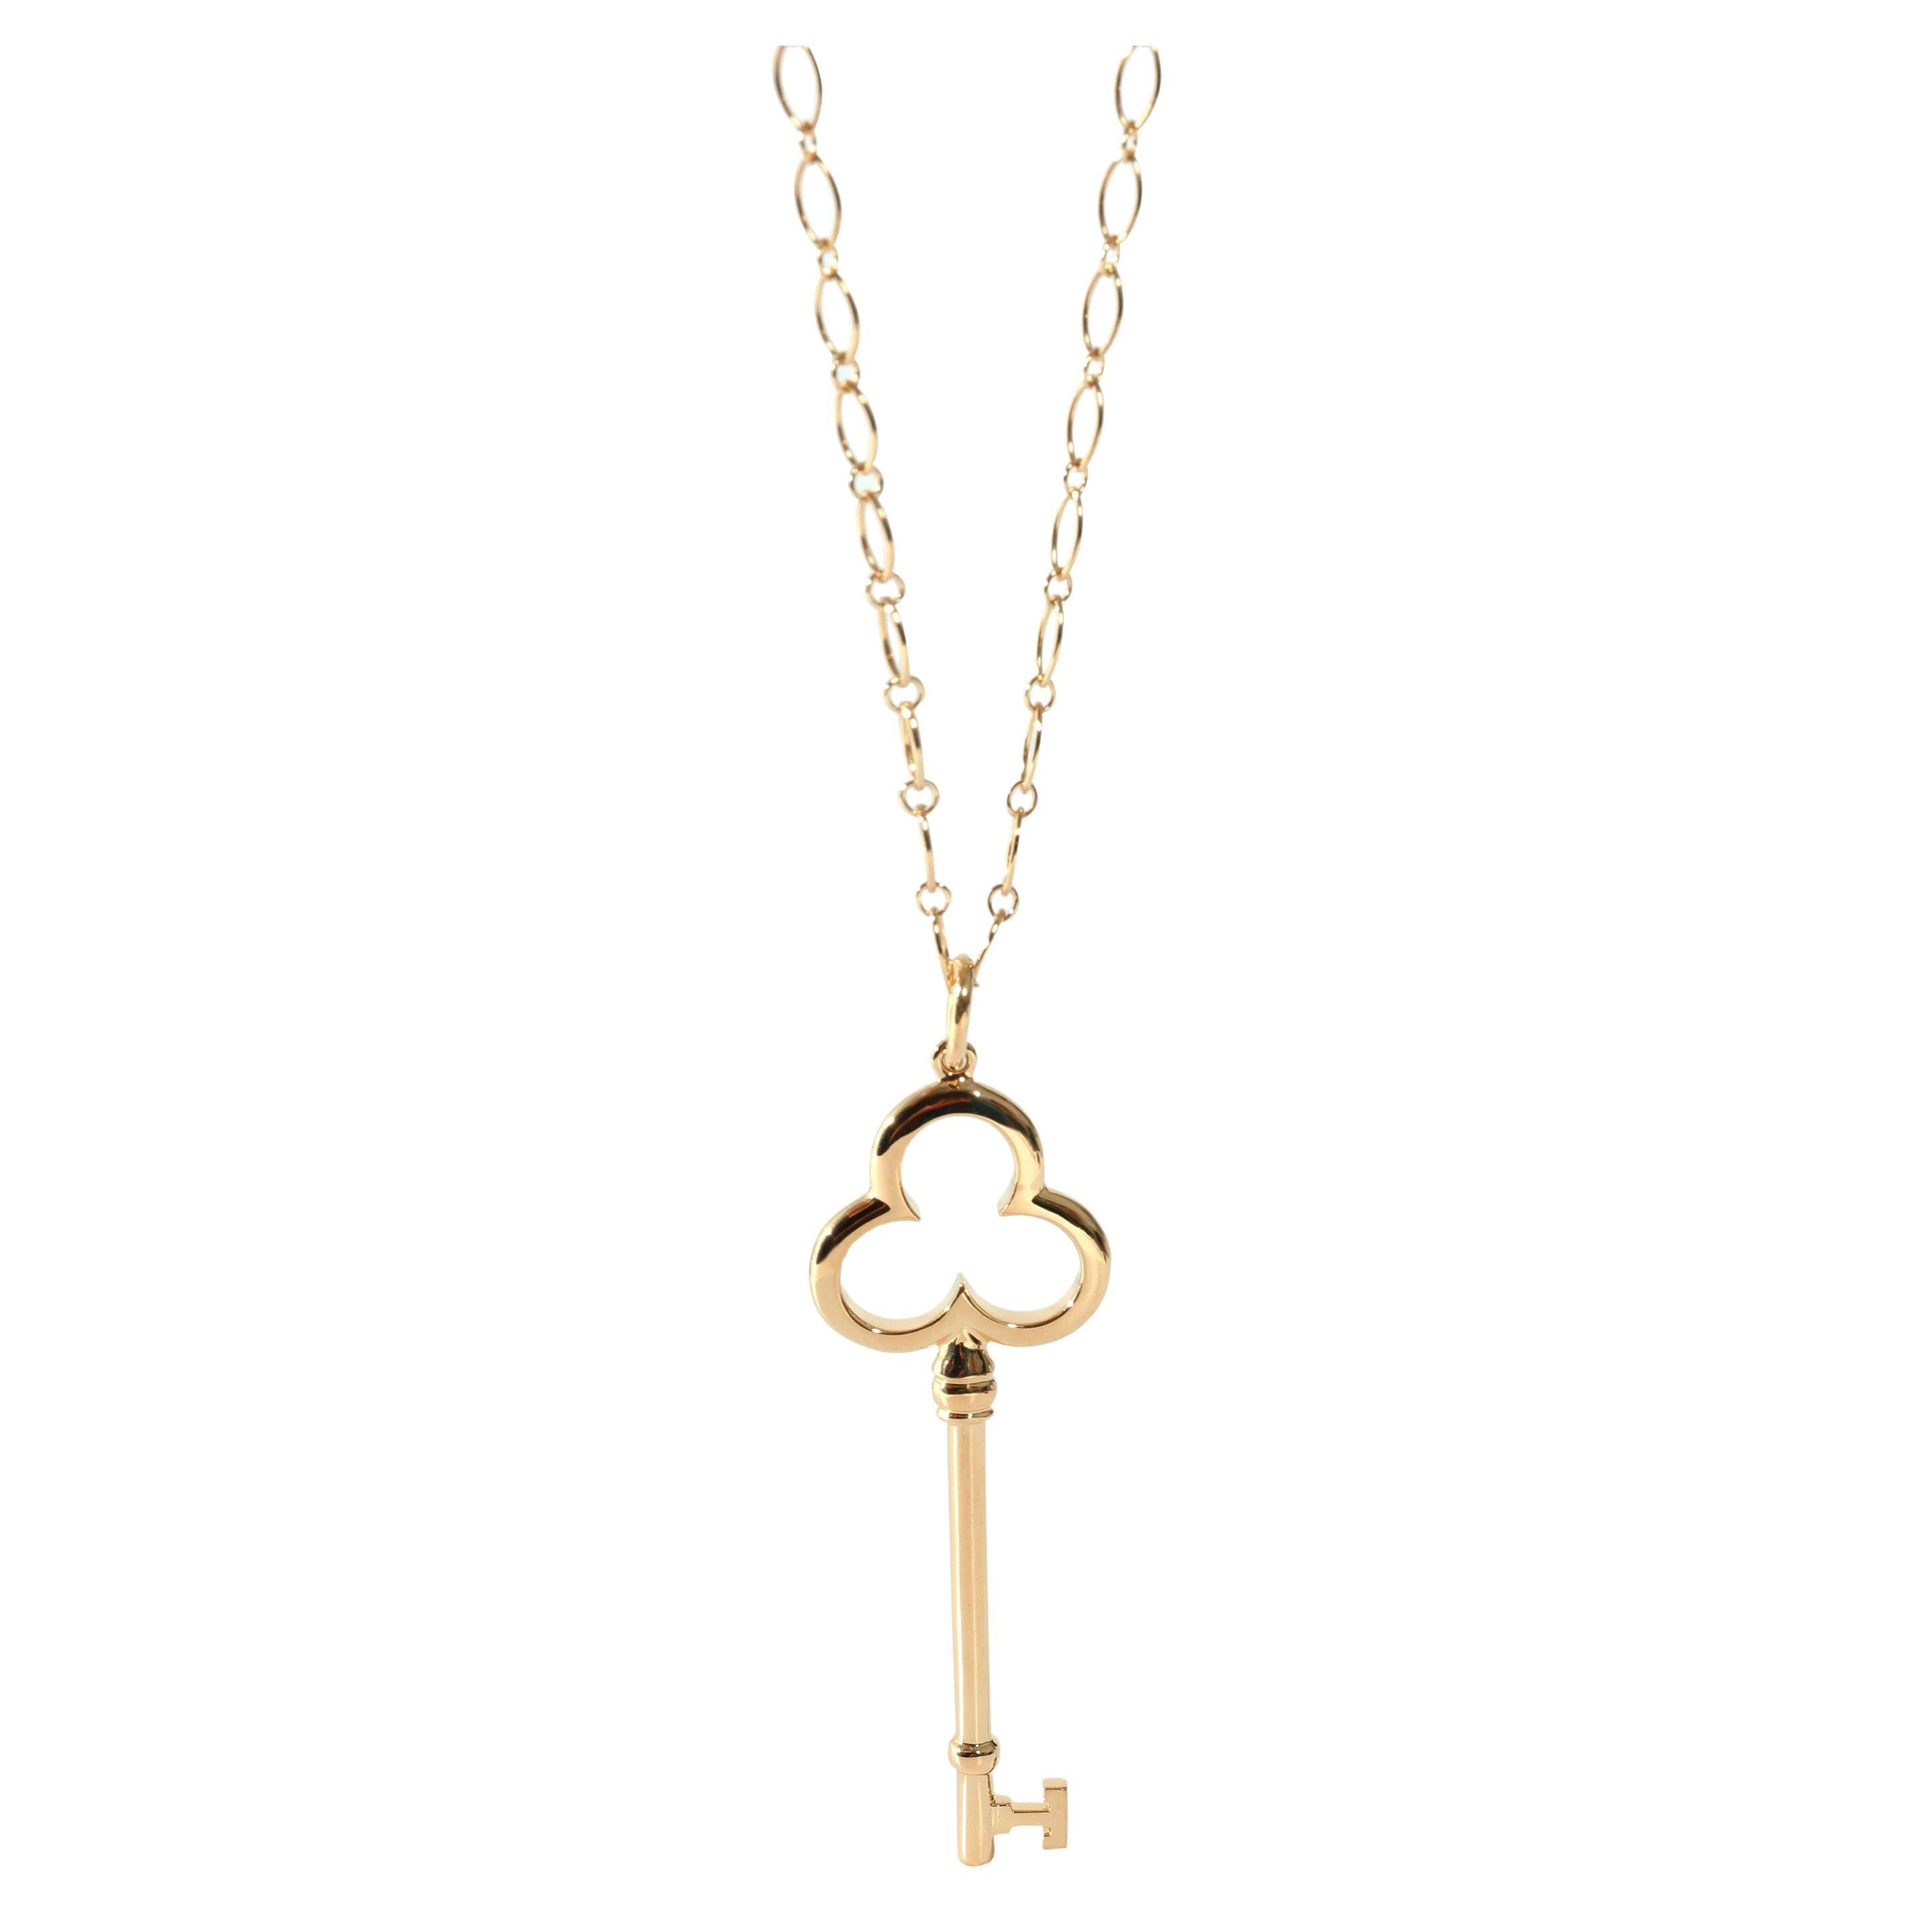 Tiffany & Co. Trefoil Key Pendant Necklace in 18KT Yellow Gold For Sale